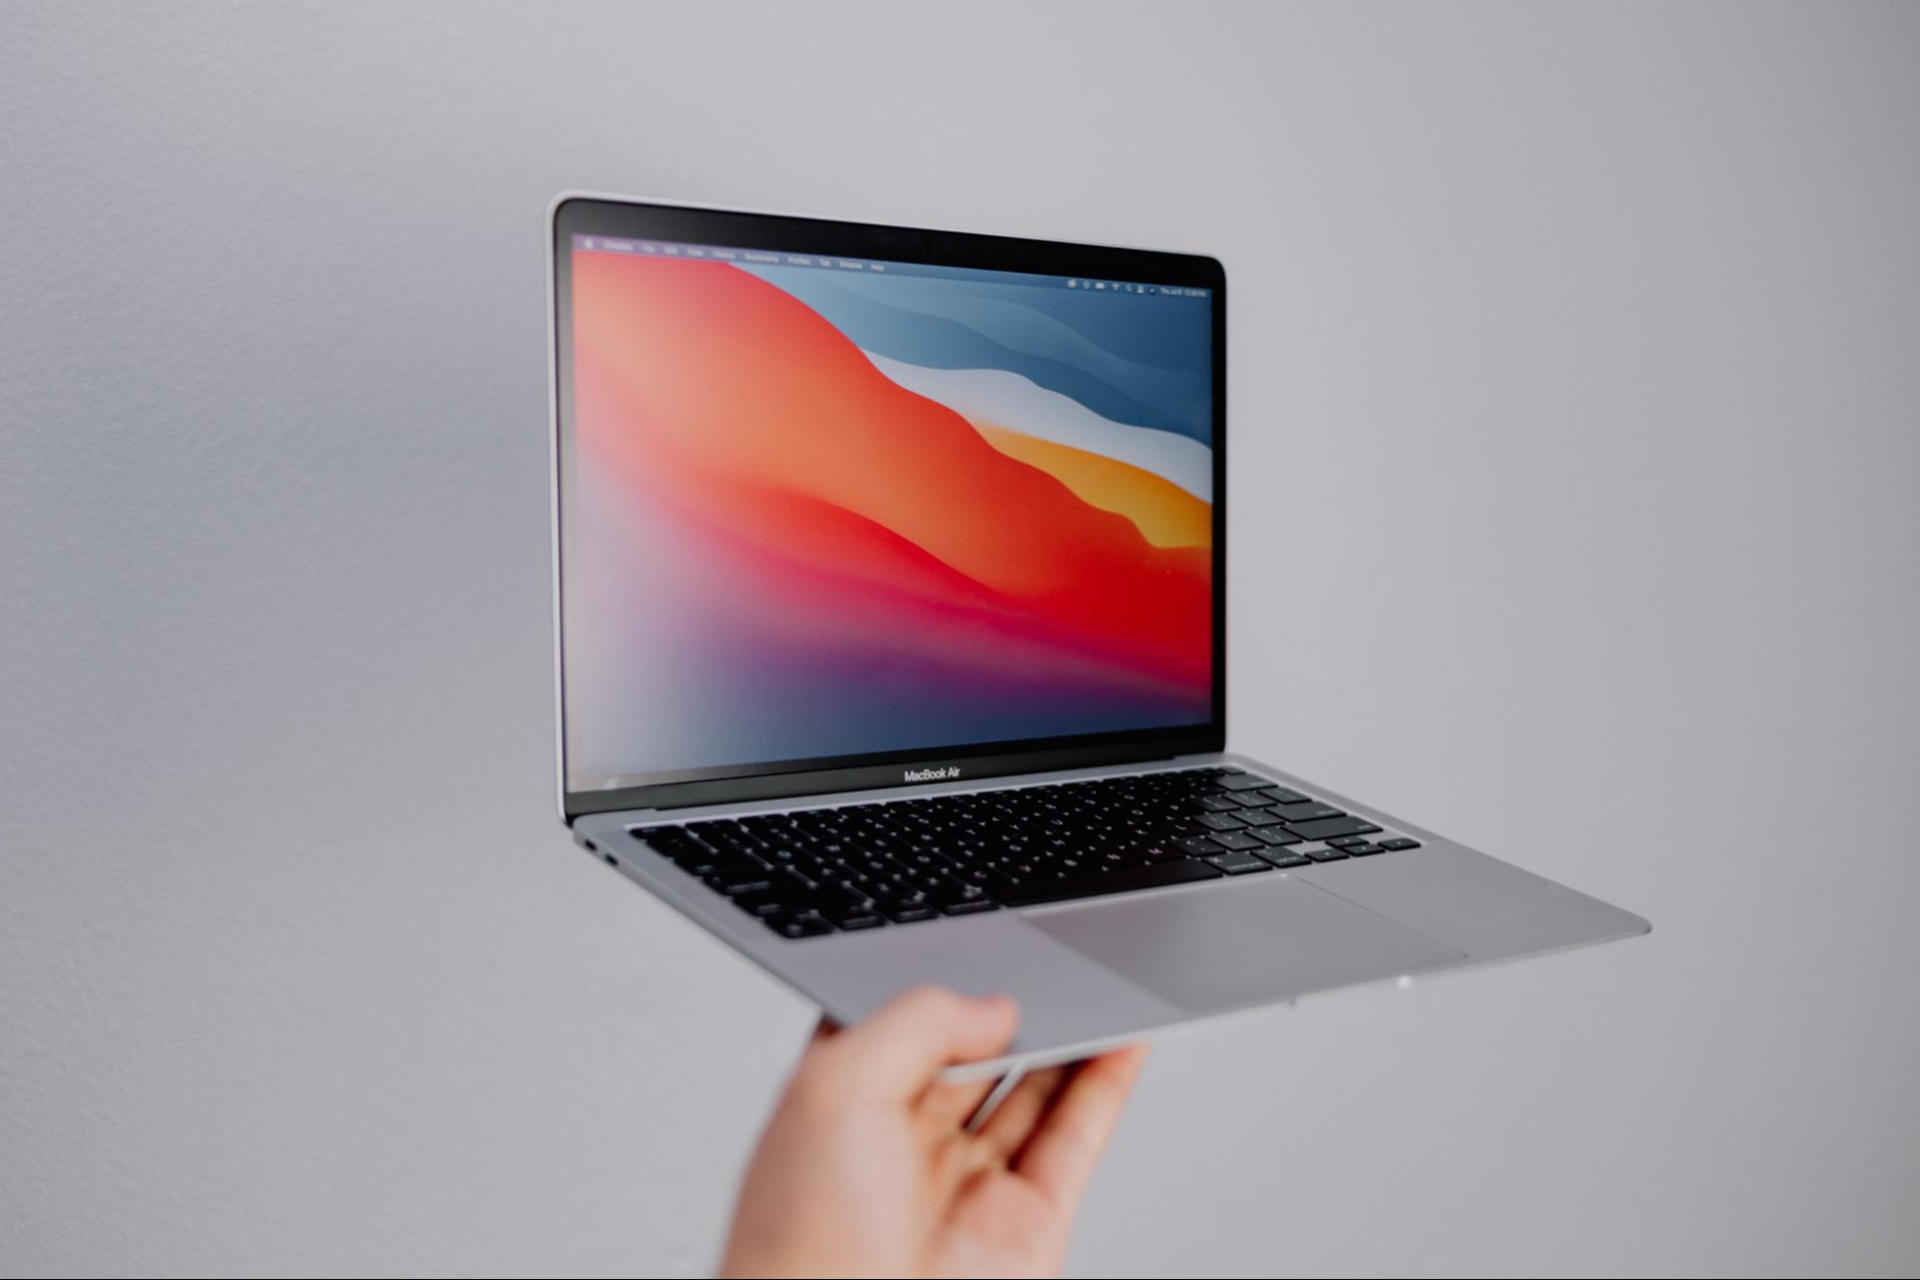 MacBook Air size and design